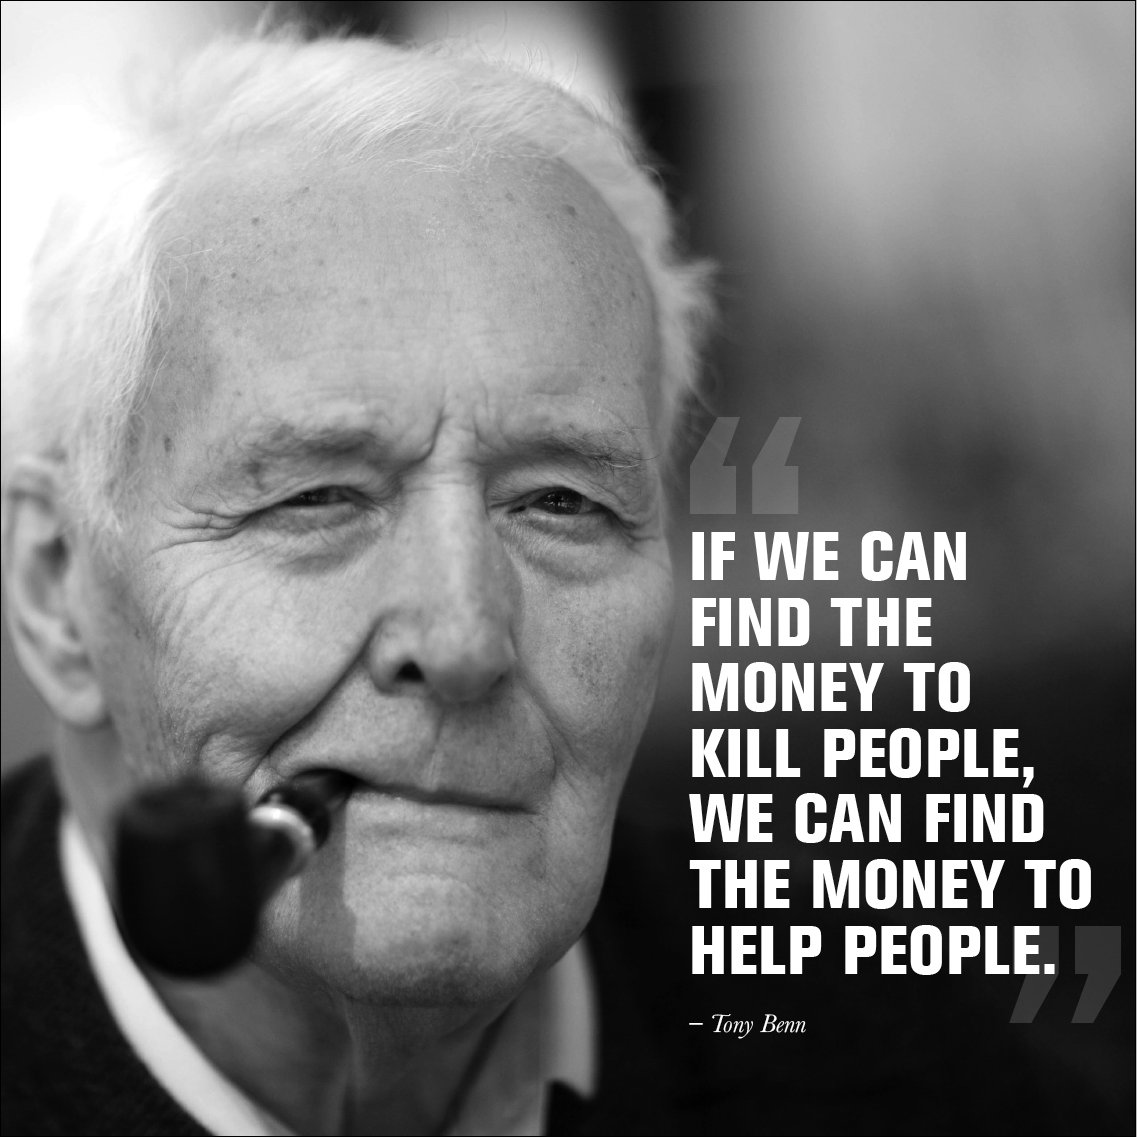 This, never more relevant than this morning....! #BBCBreakfast #GrantShapps #defencebudget #TonyBenn